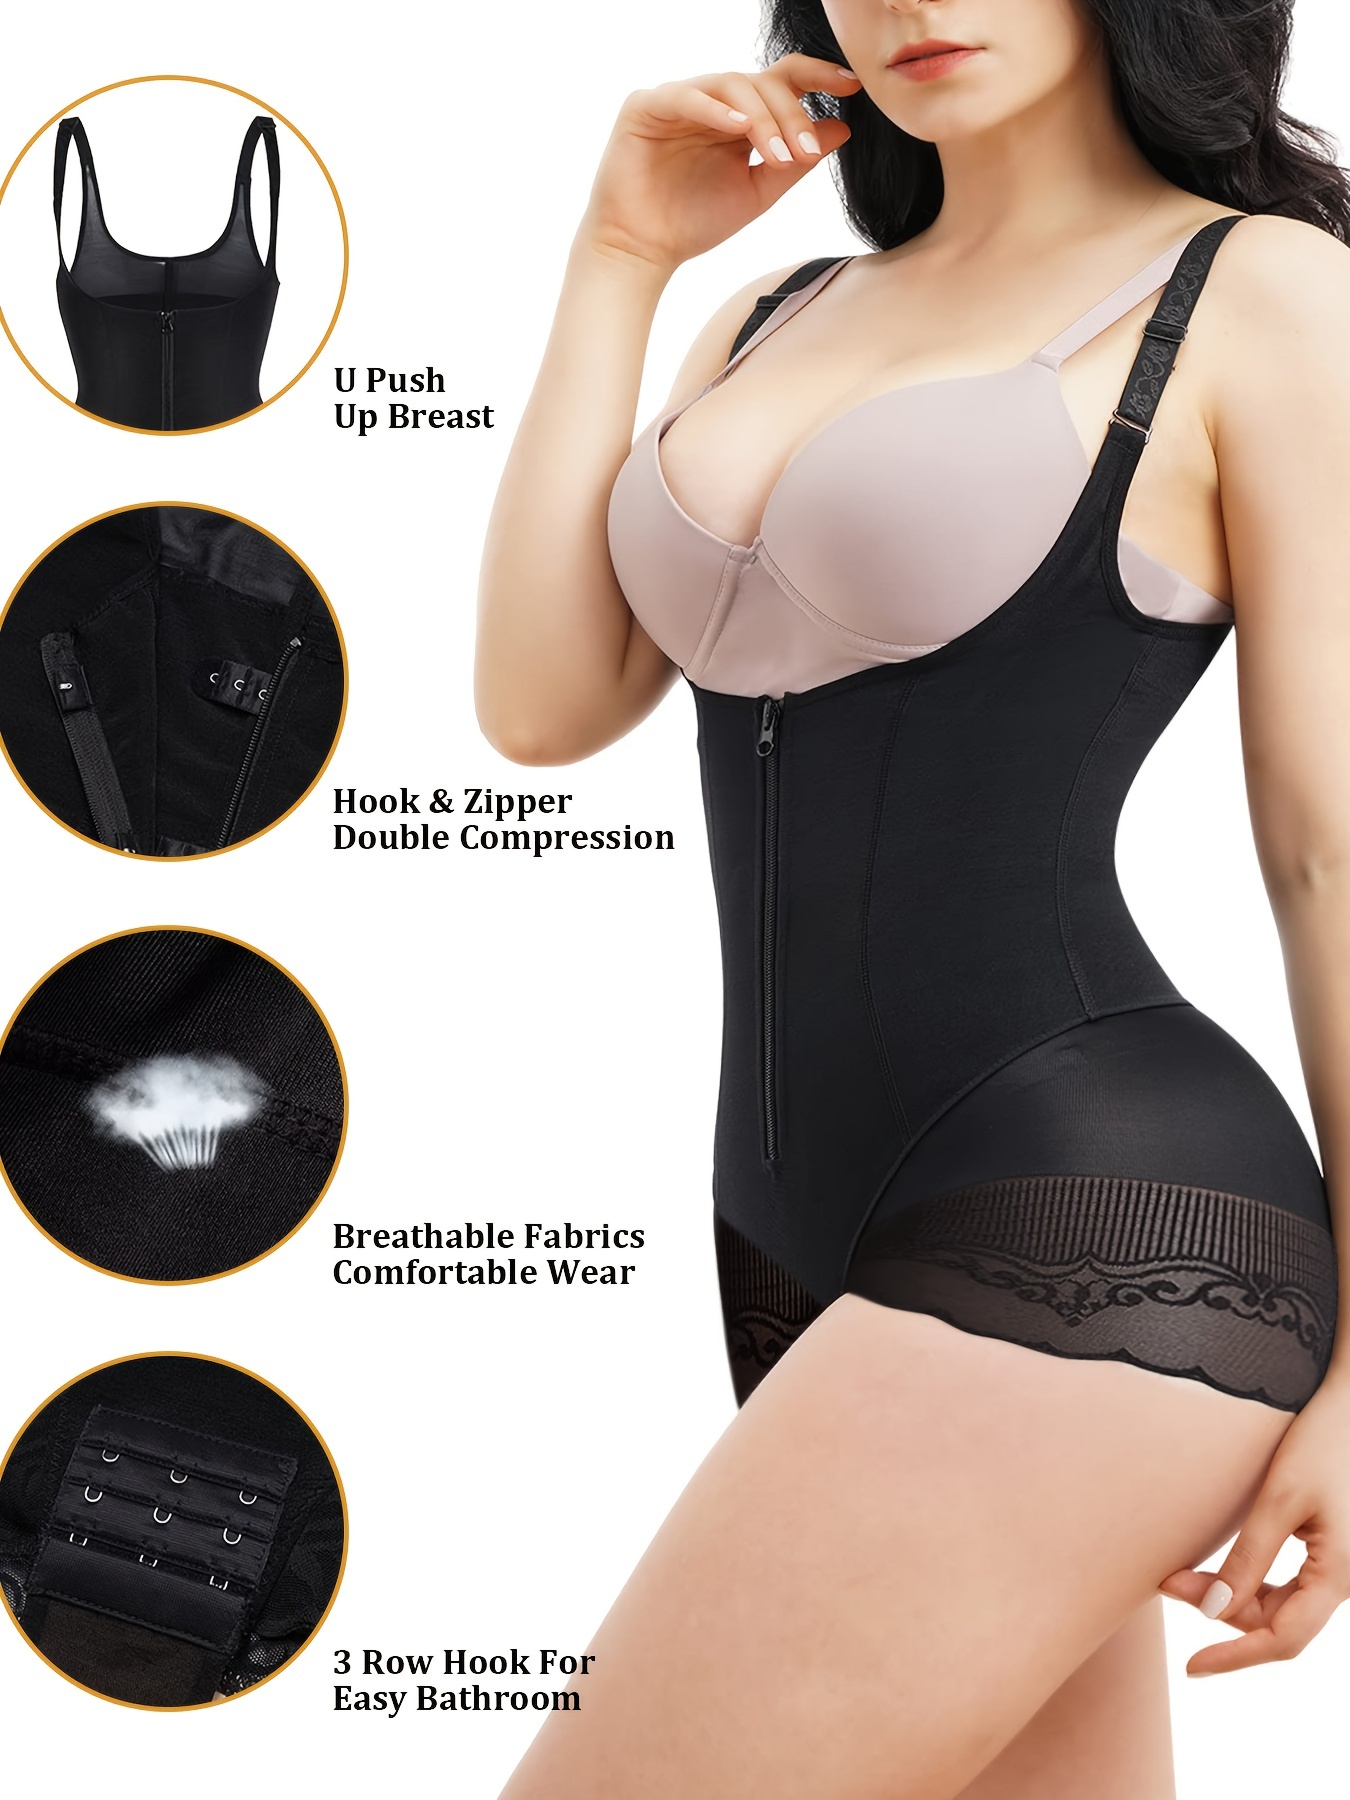  3 Easy to Wear and Comfortable Shapewear That Can